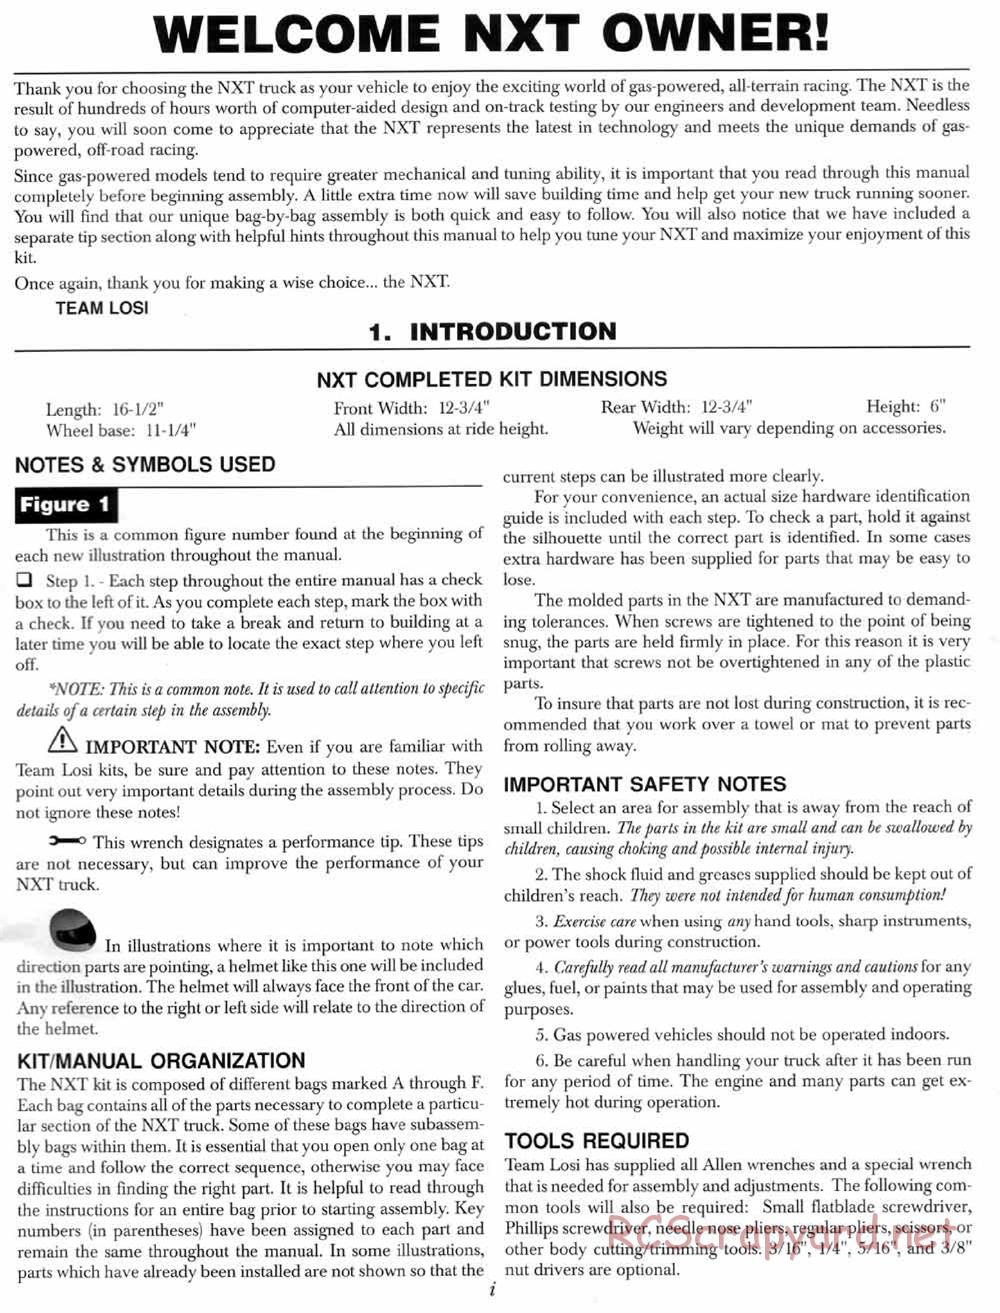 Team Losi - NXT - Manual - Page 2